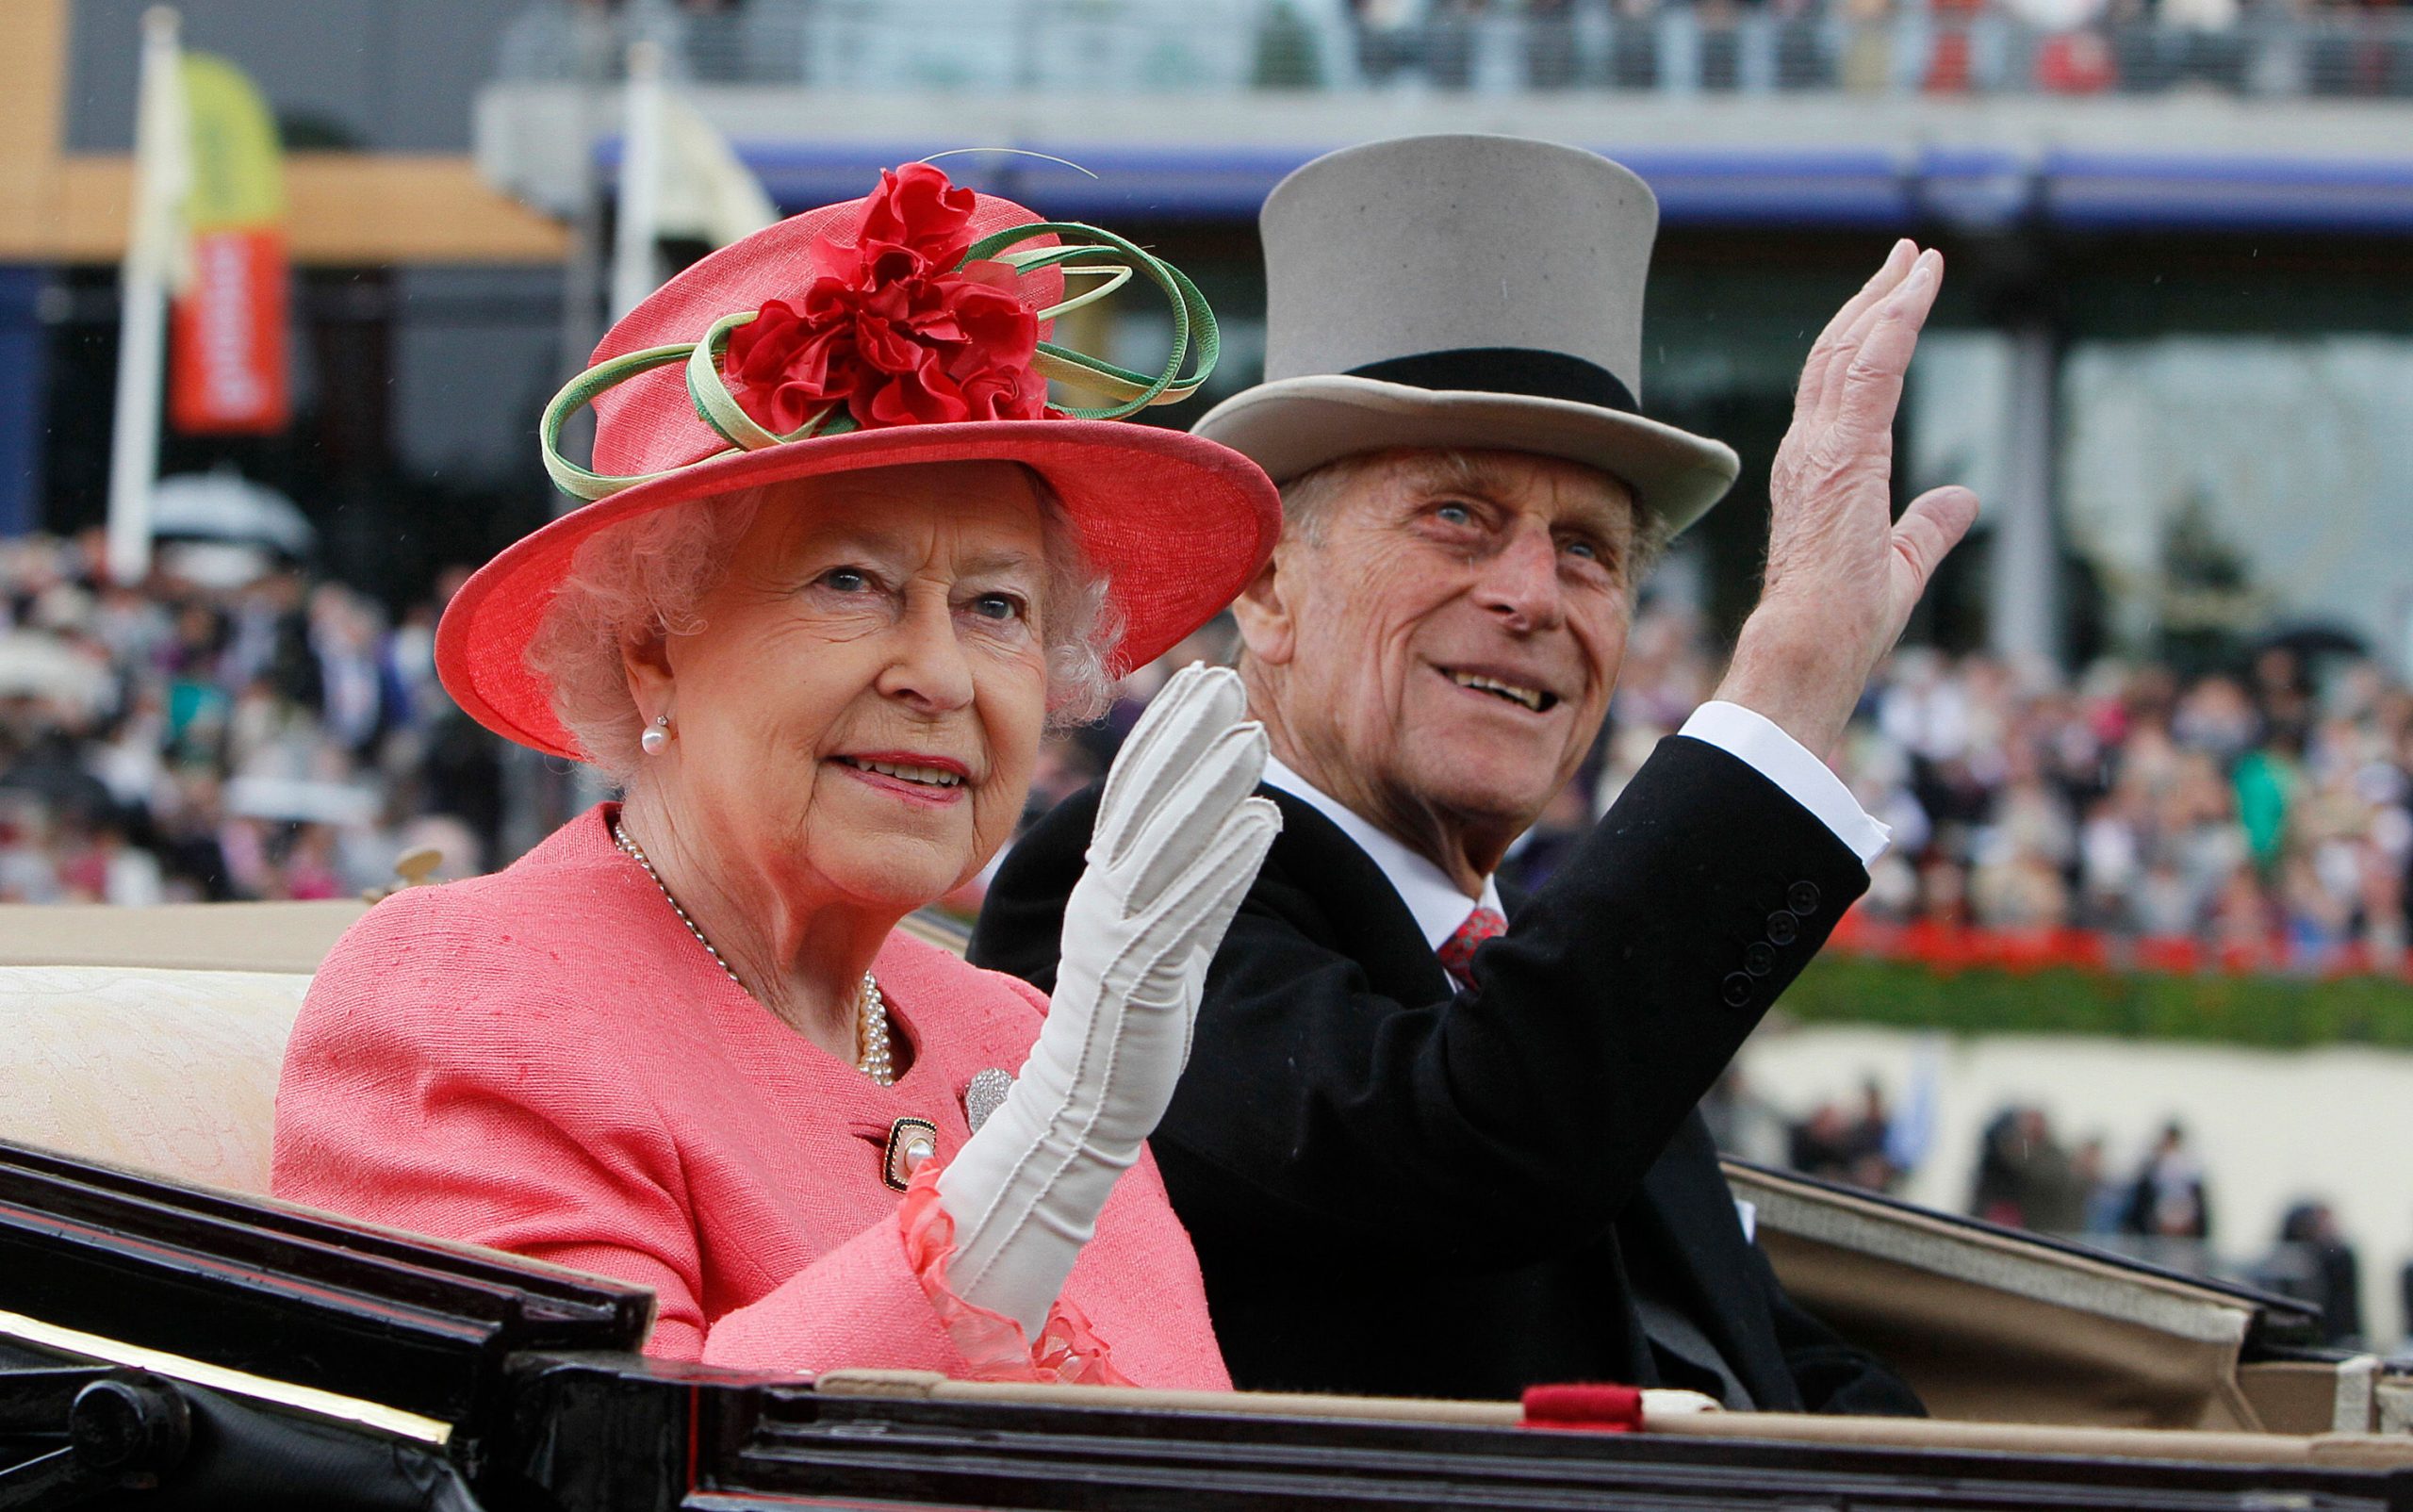 BBC receives nearly 110,000 complaints about Prince Philip coverage